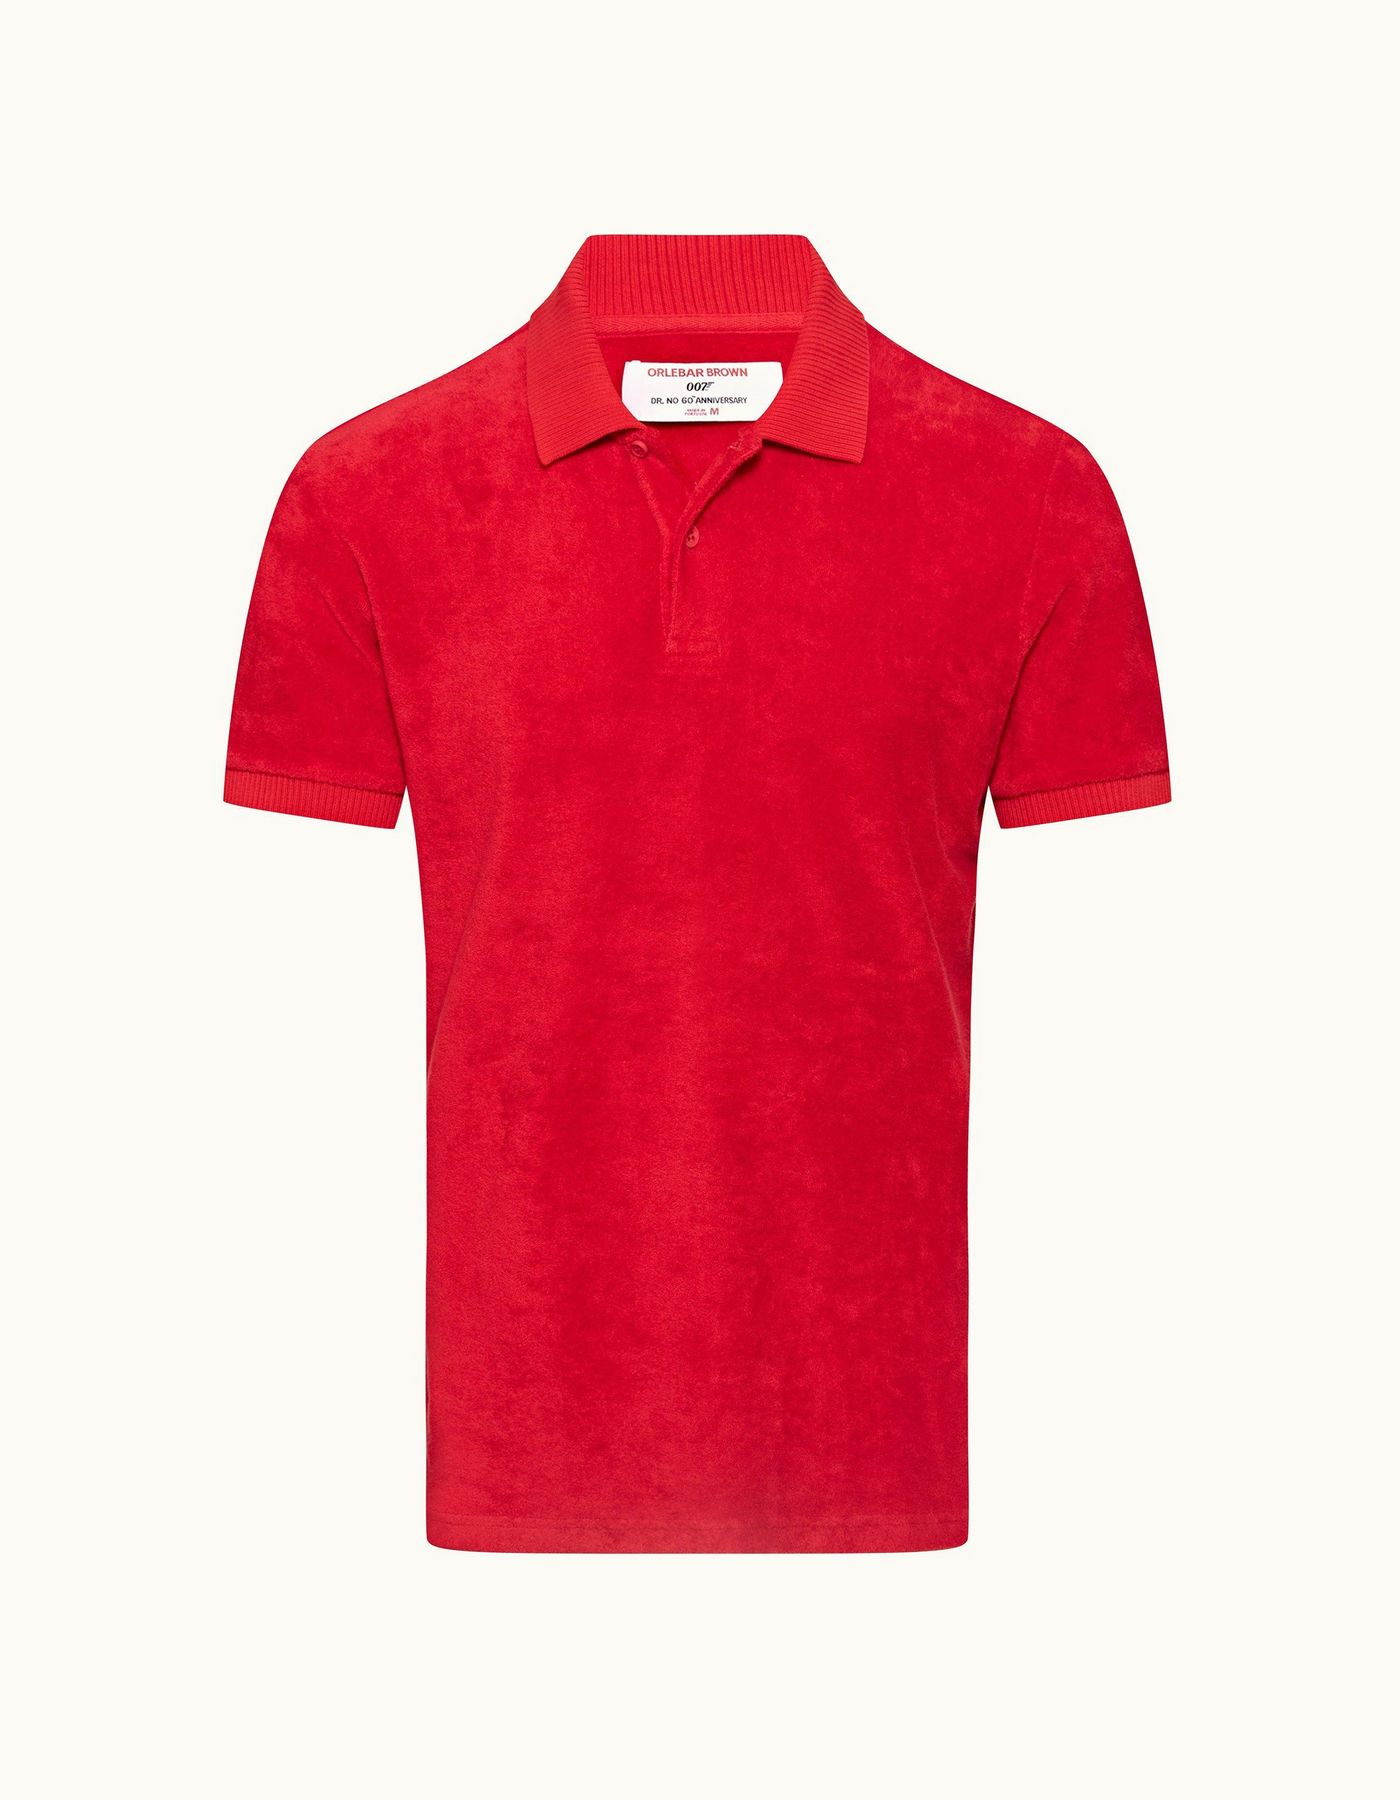 Dr No Towelling Polo - Mens Red 007 Ryder Dr. No Towelling Polo Shirt